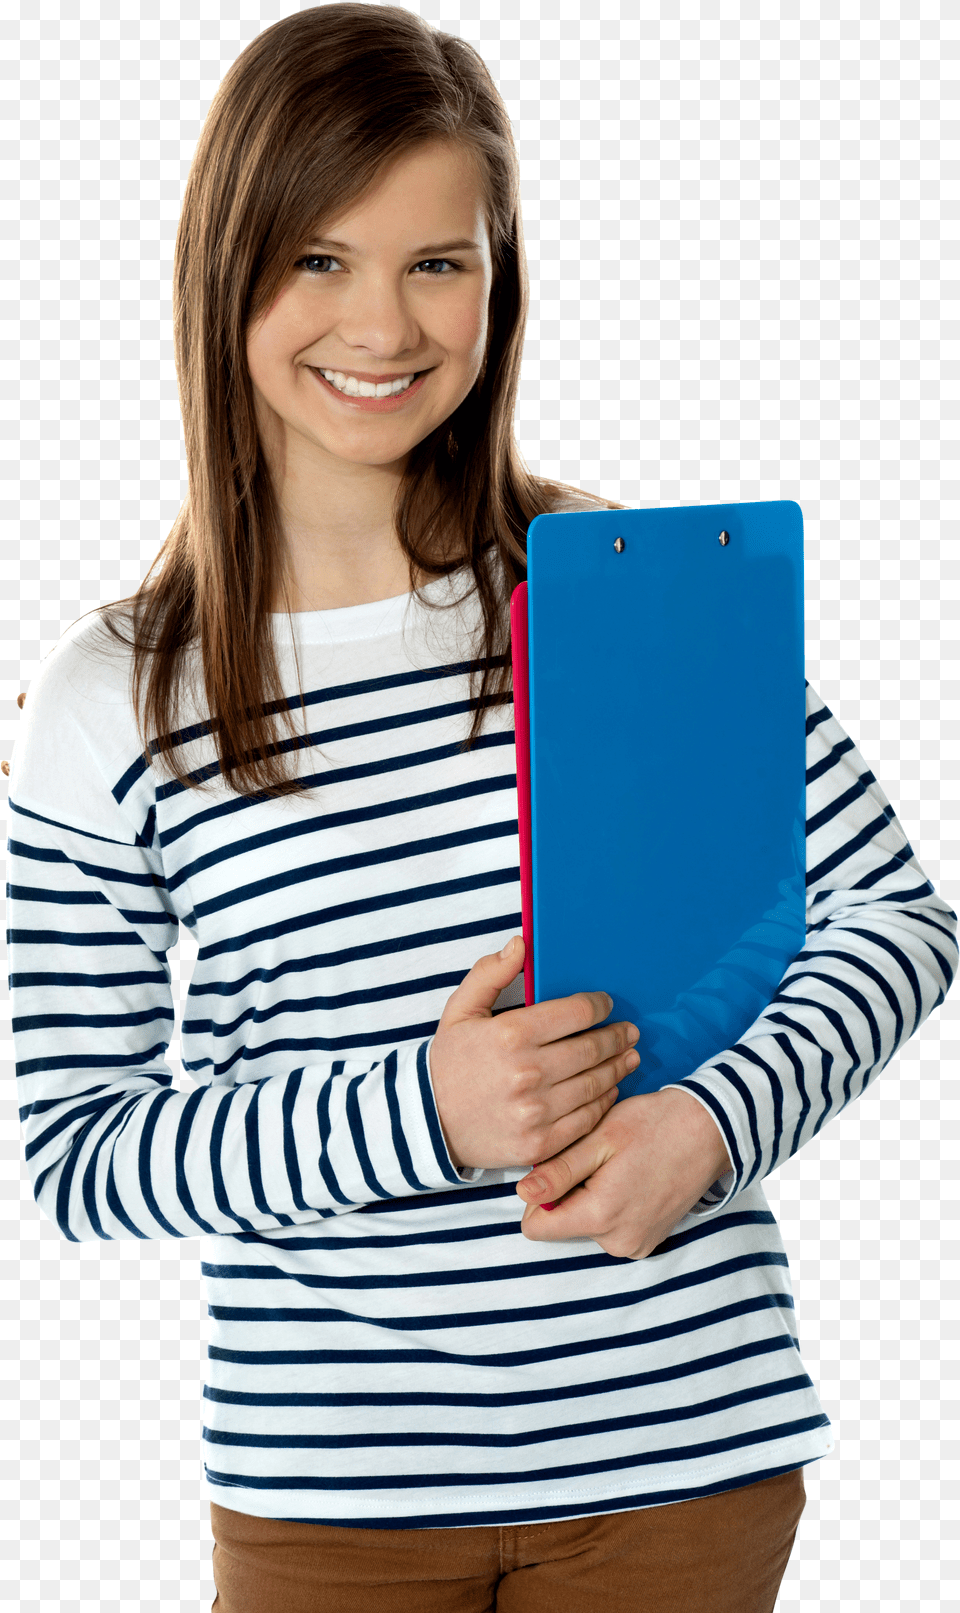 Young Girl Student Image For Download Woman Student Png